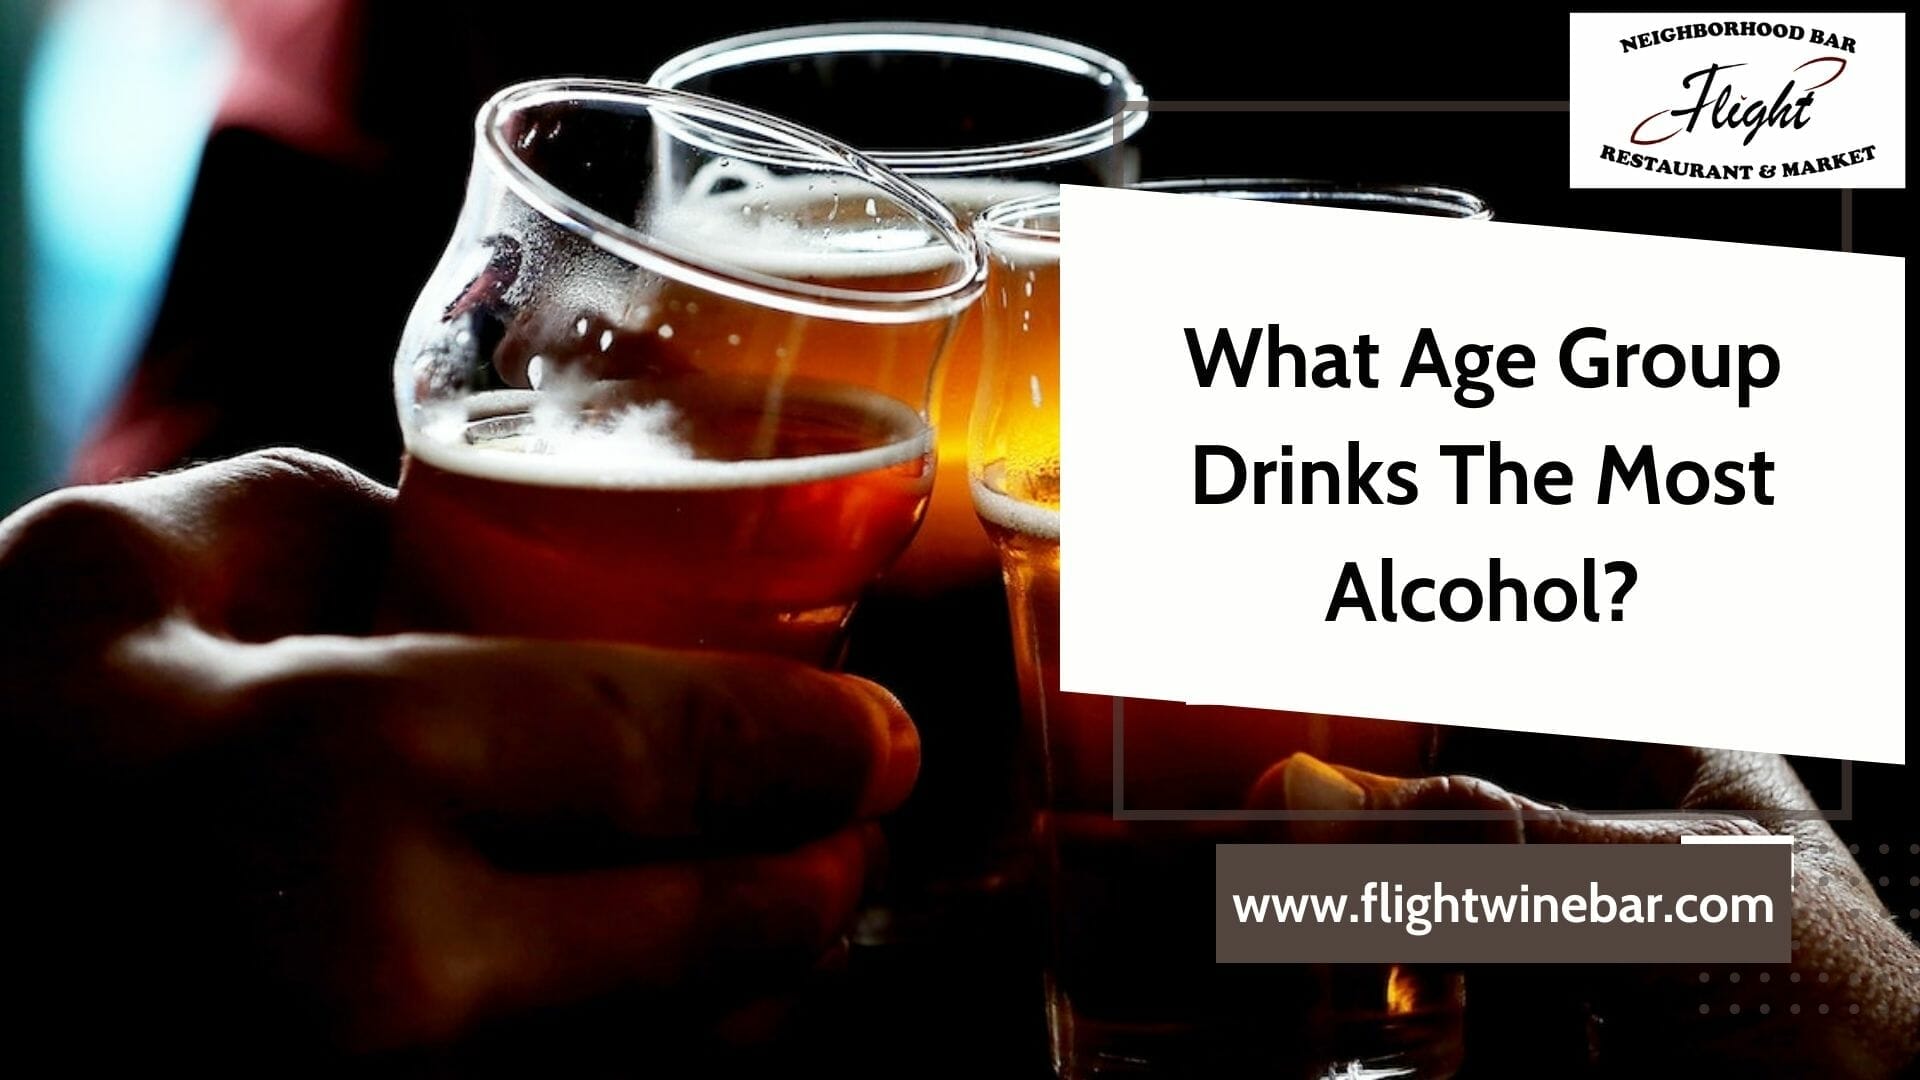 What Age Group Drinks The Most Alcohol